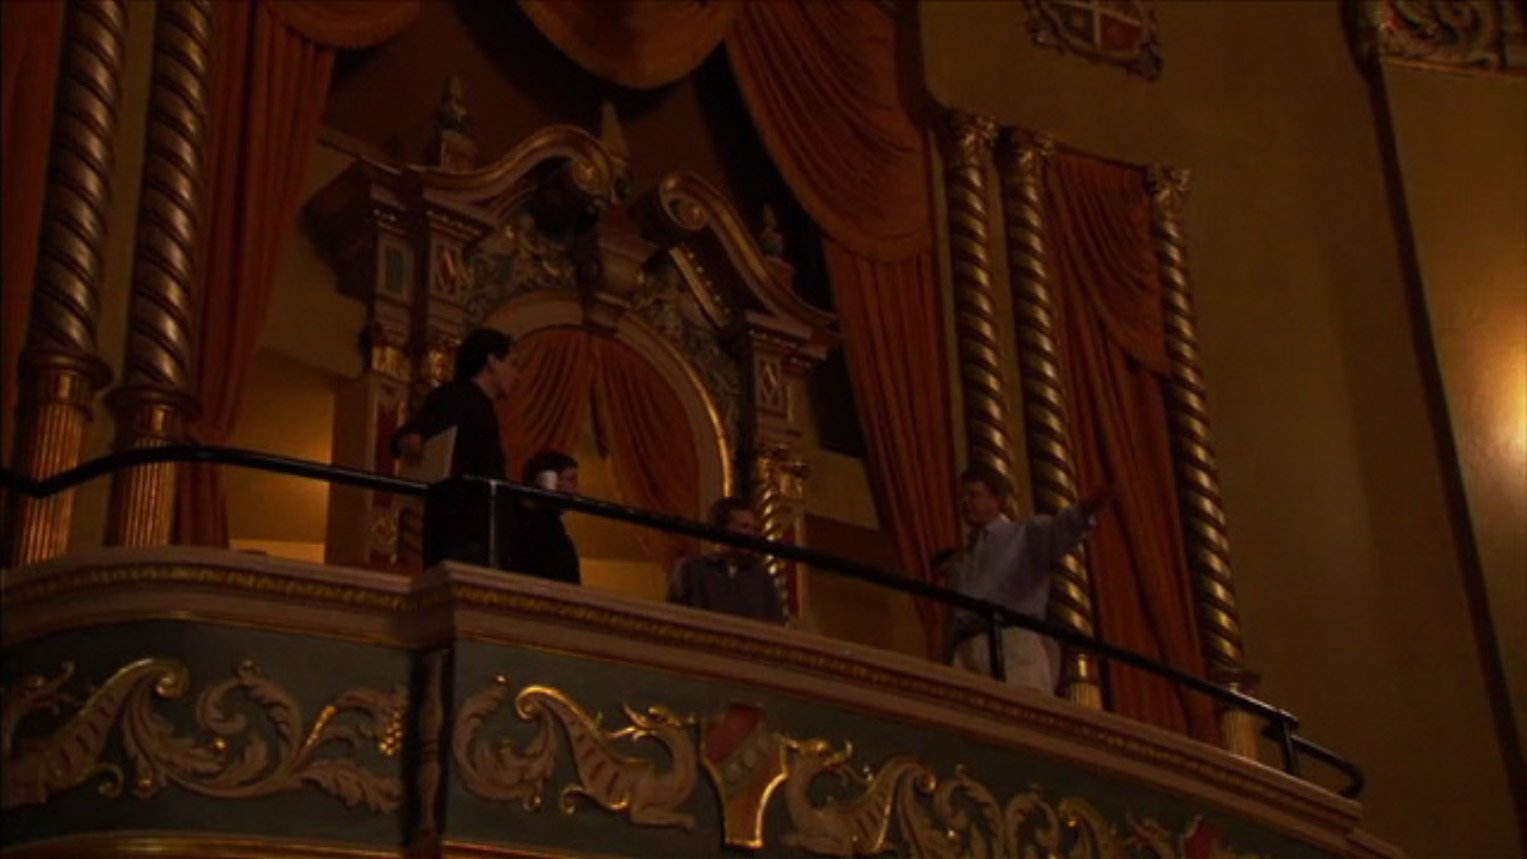 Band in the Balcony